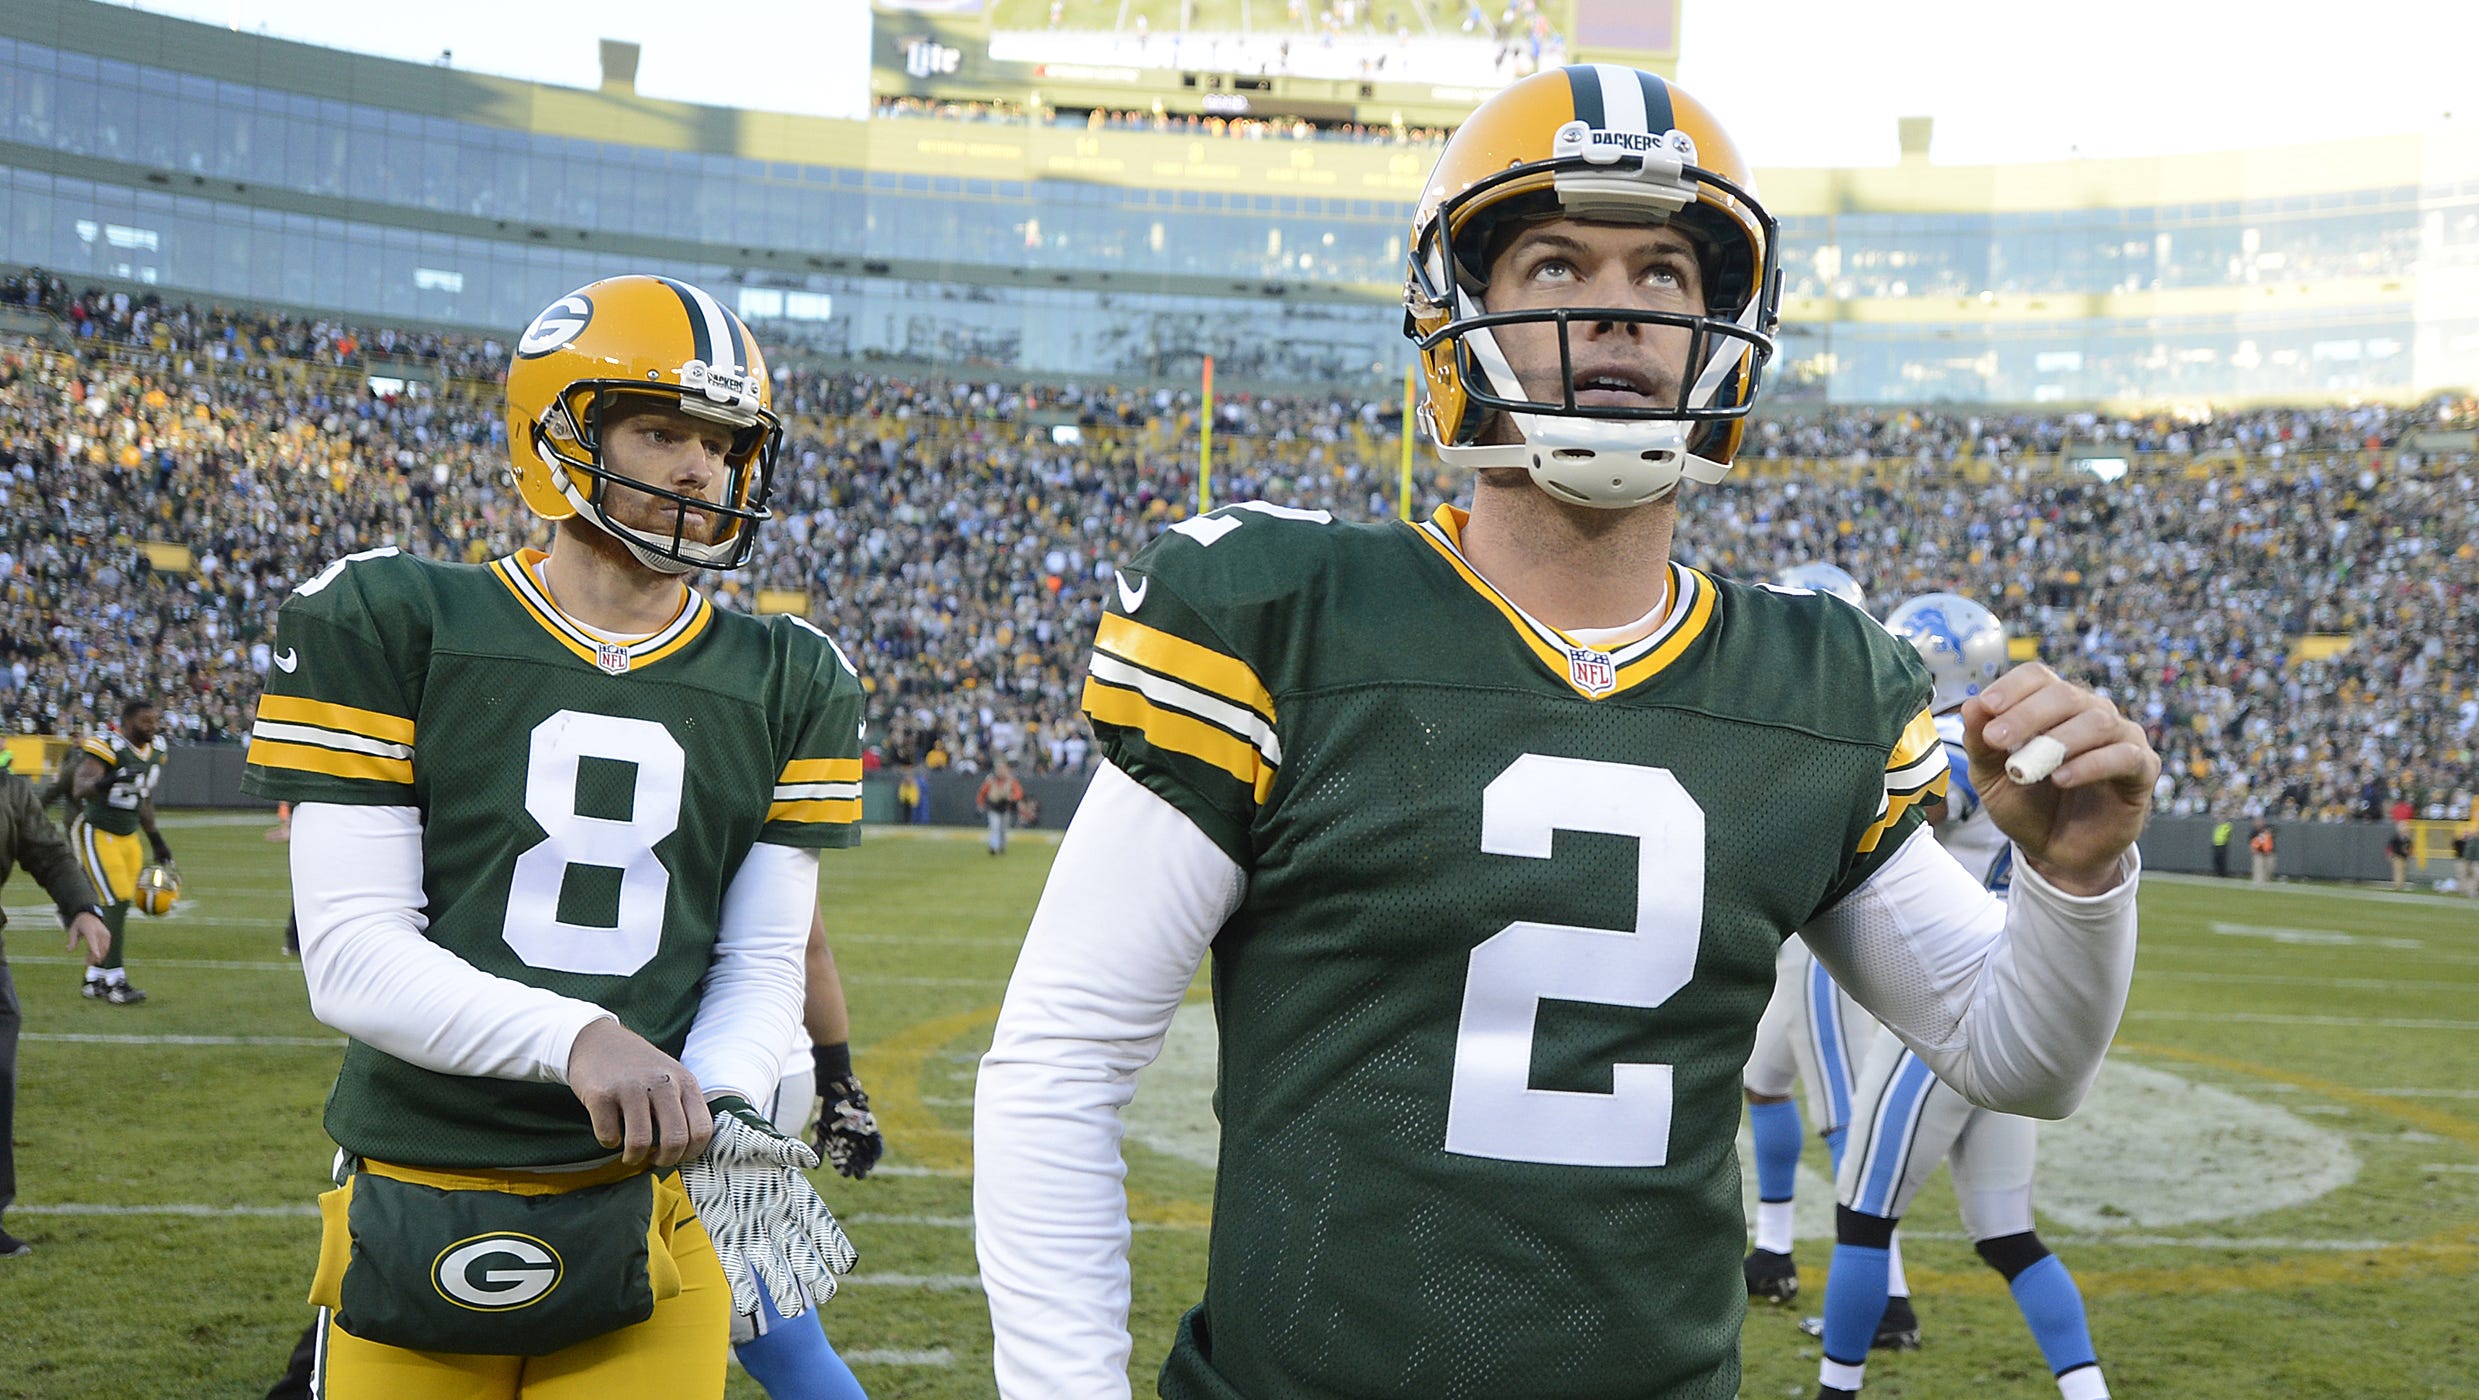 Green Bay Packers kicker Mason Crosby reacts as he watches the replay of his missed field goal attempt against the Detroit Lions on Nov. 15, 2015, at Lambeau Field.